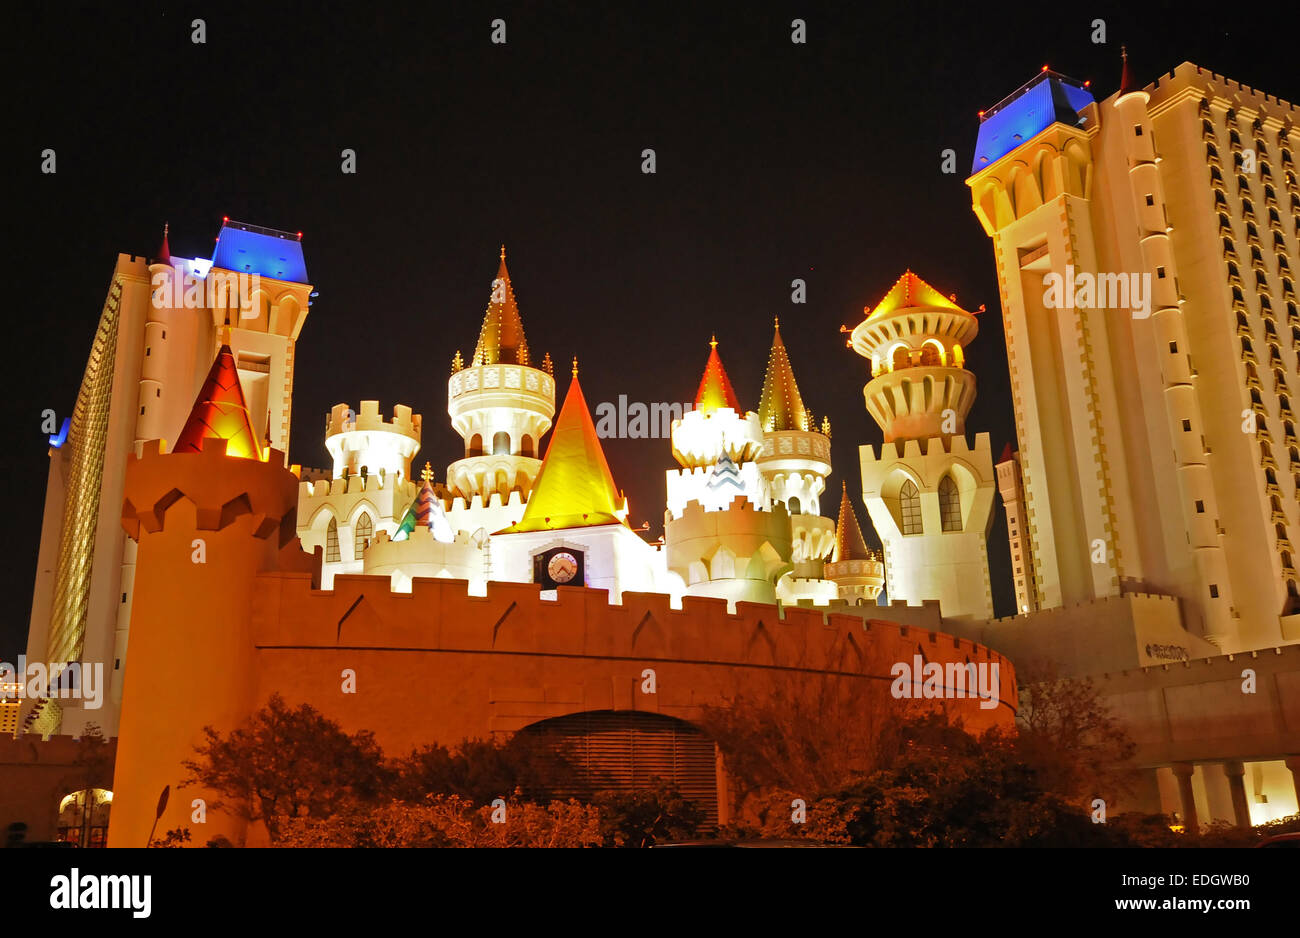 Las Vegas, USA - December 18, 2009: Excalibur Hotel and Casino on the Las Vegas strip welcomes visitors at night. Stock Photo